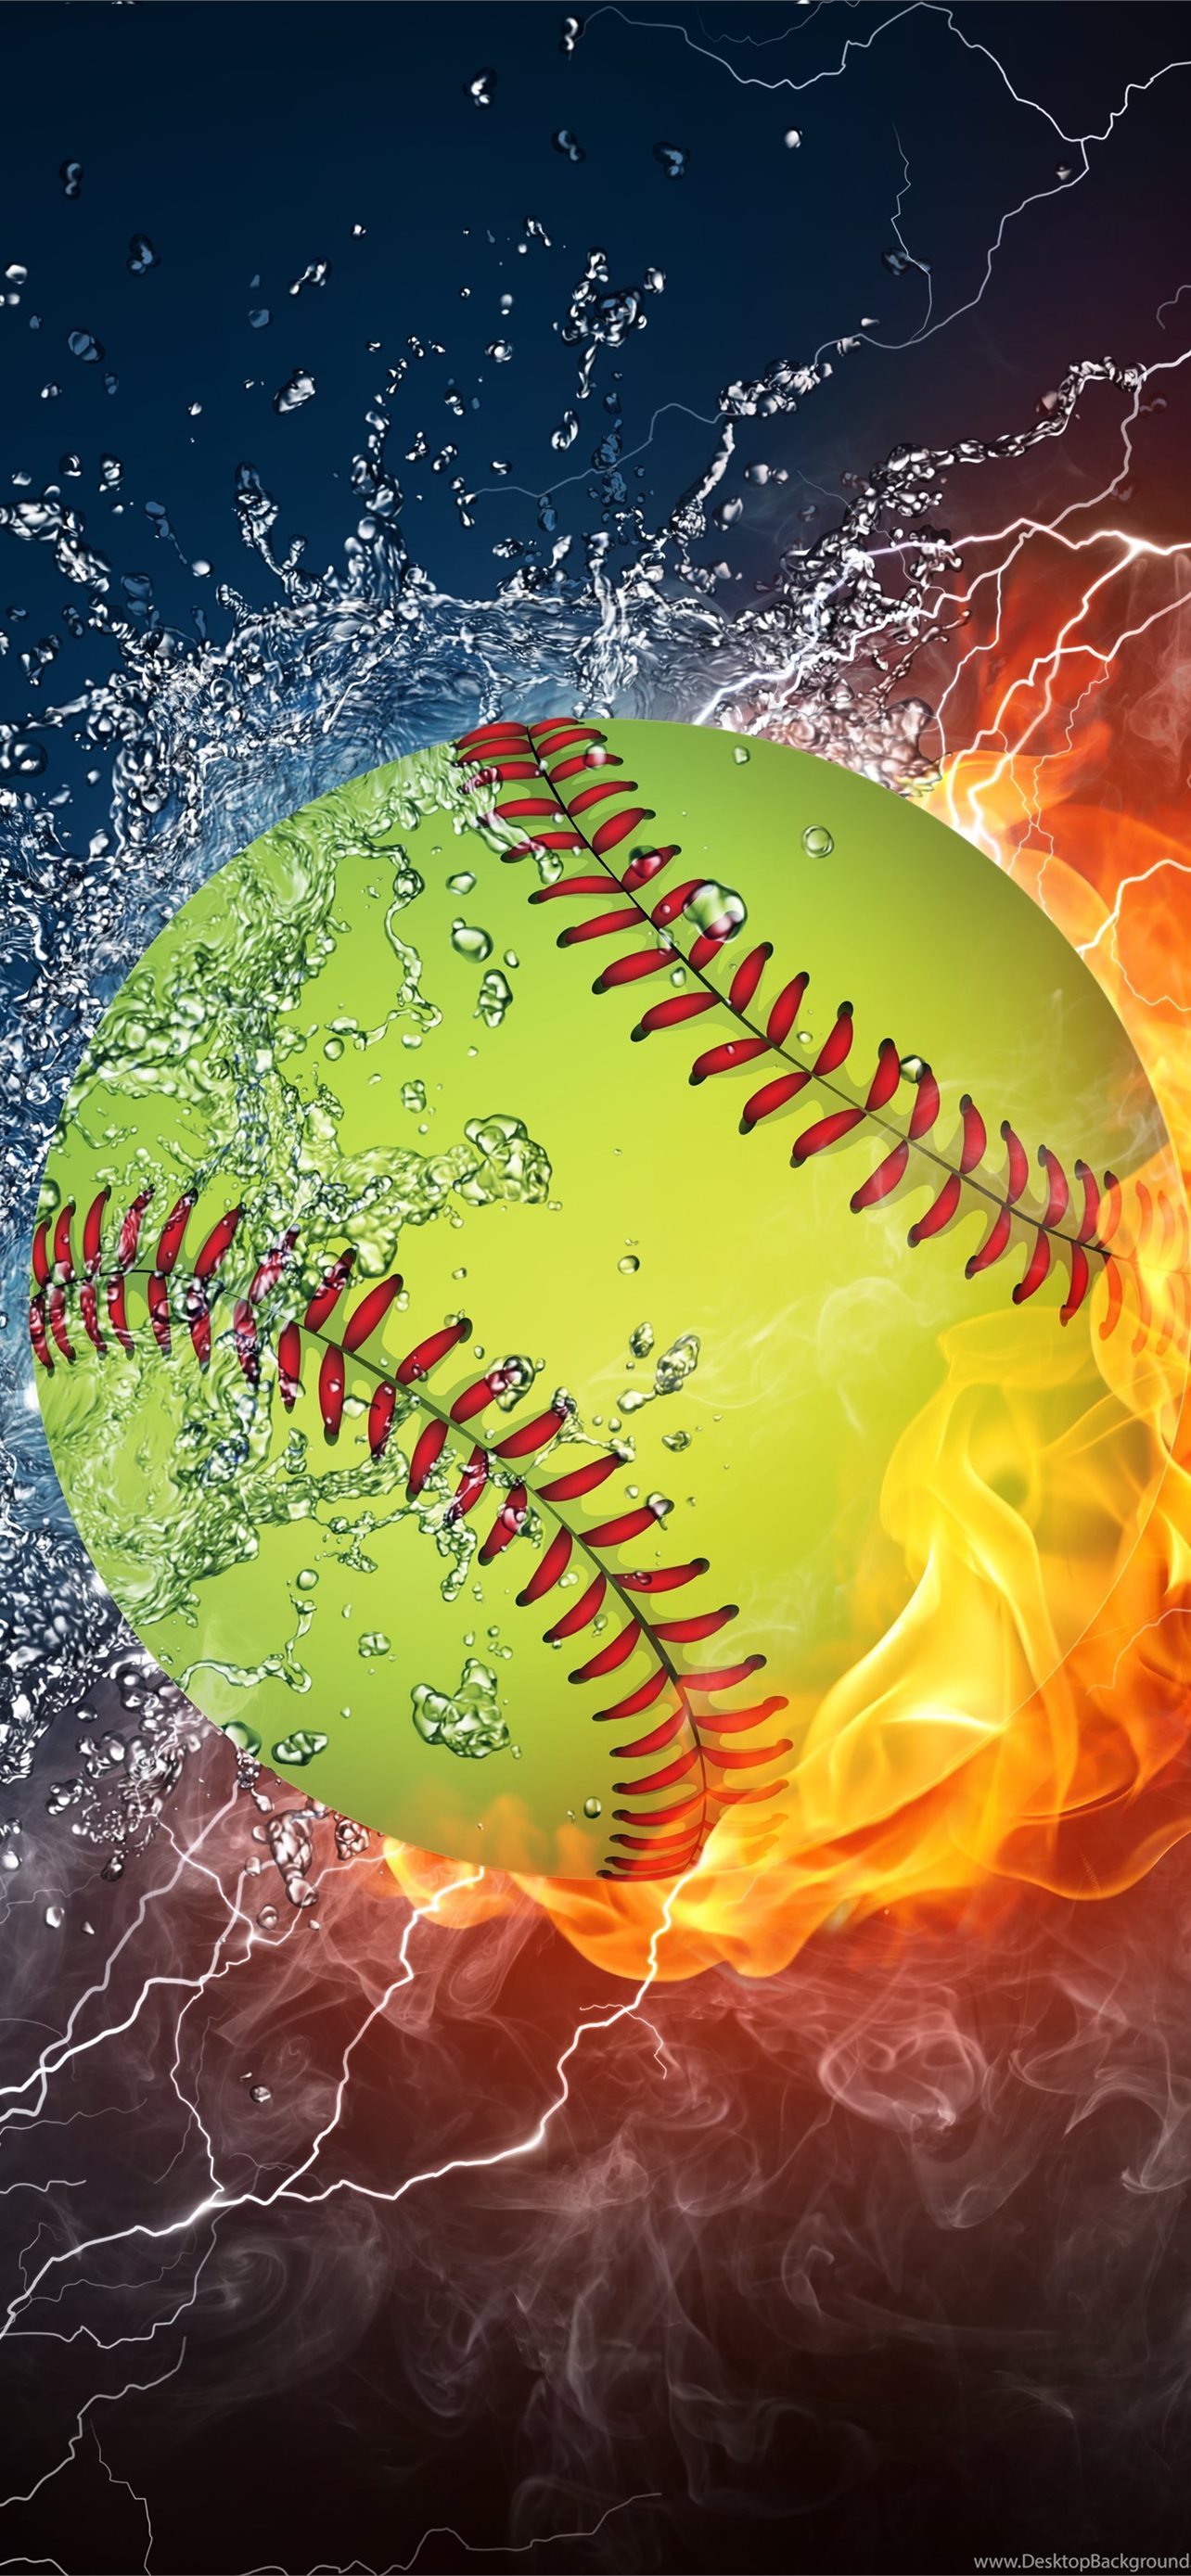 Download Fire And Water Awesome Softball Wallpaper  Wallpaperscom